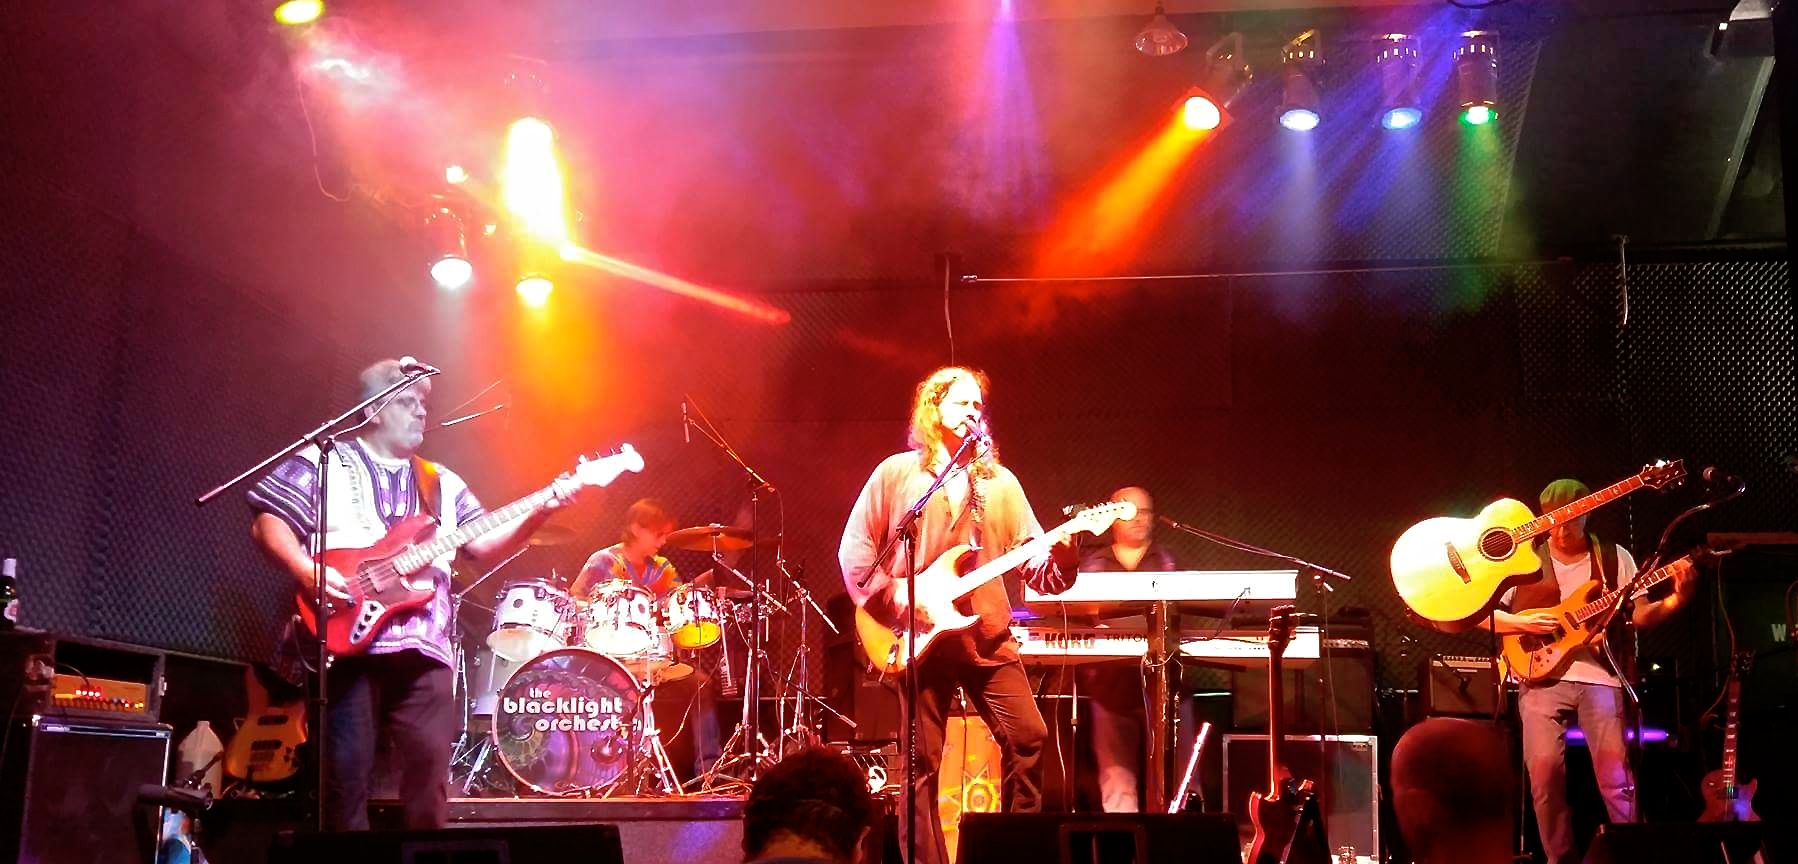 the Blacklight Orchestra performing at Orion Studios on September 24, 2016